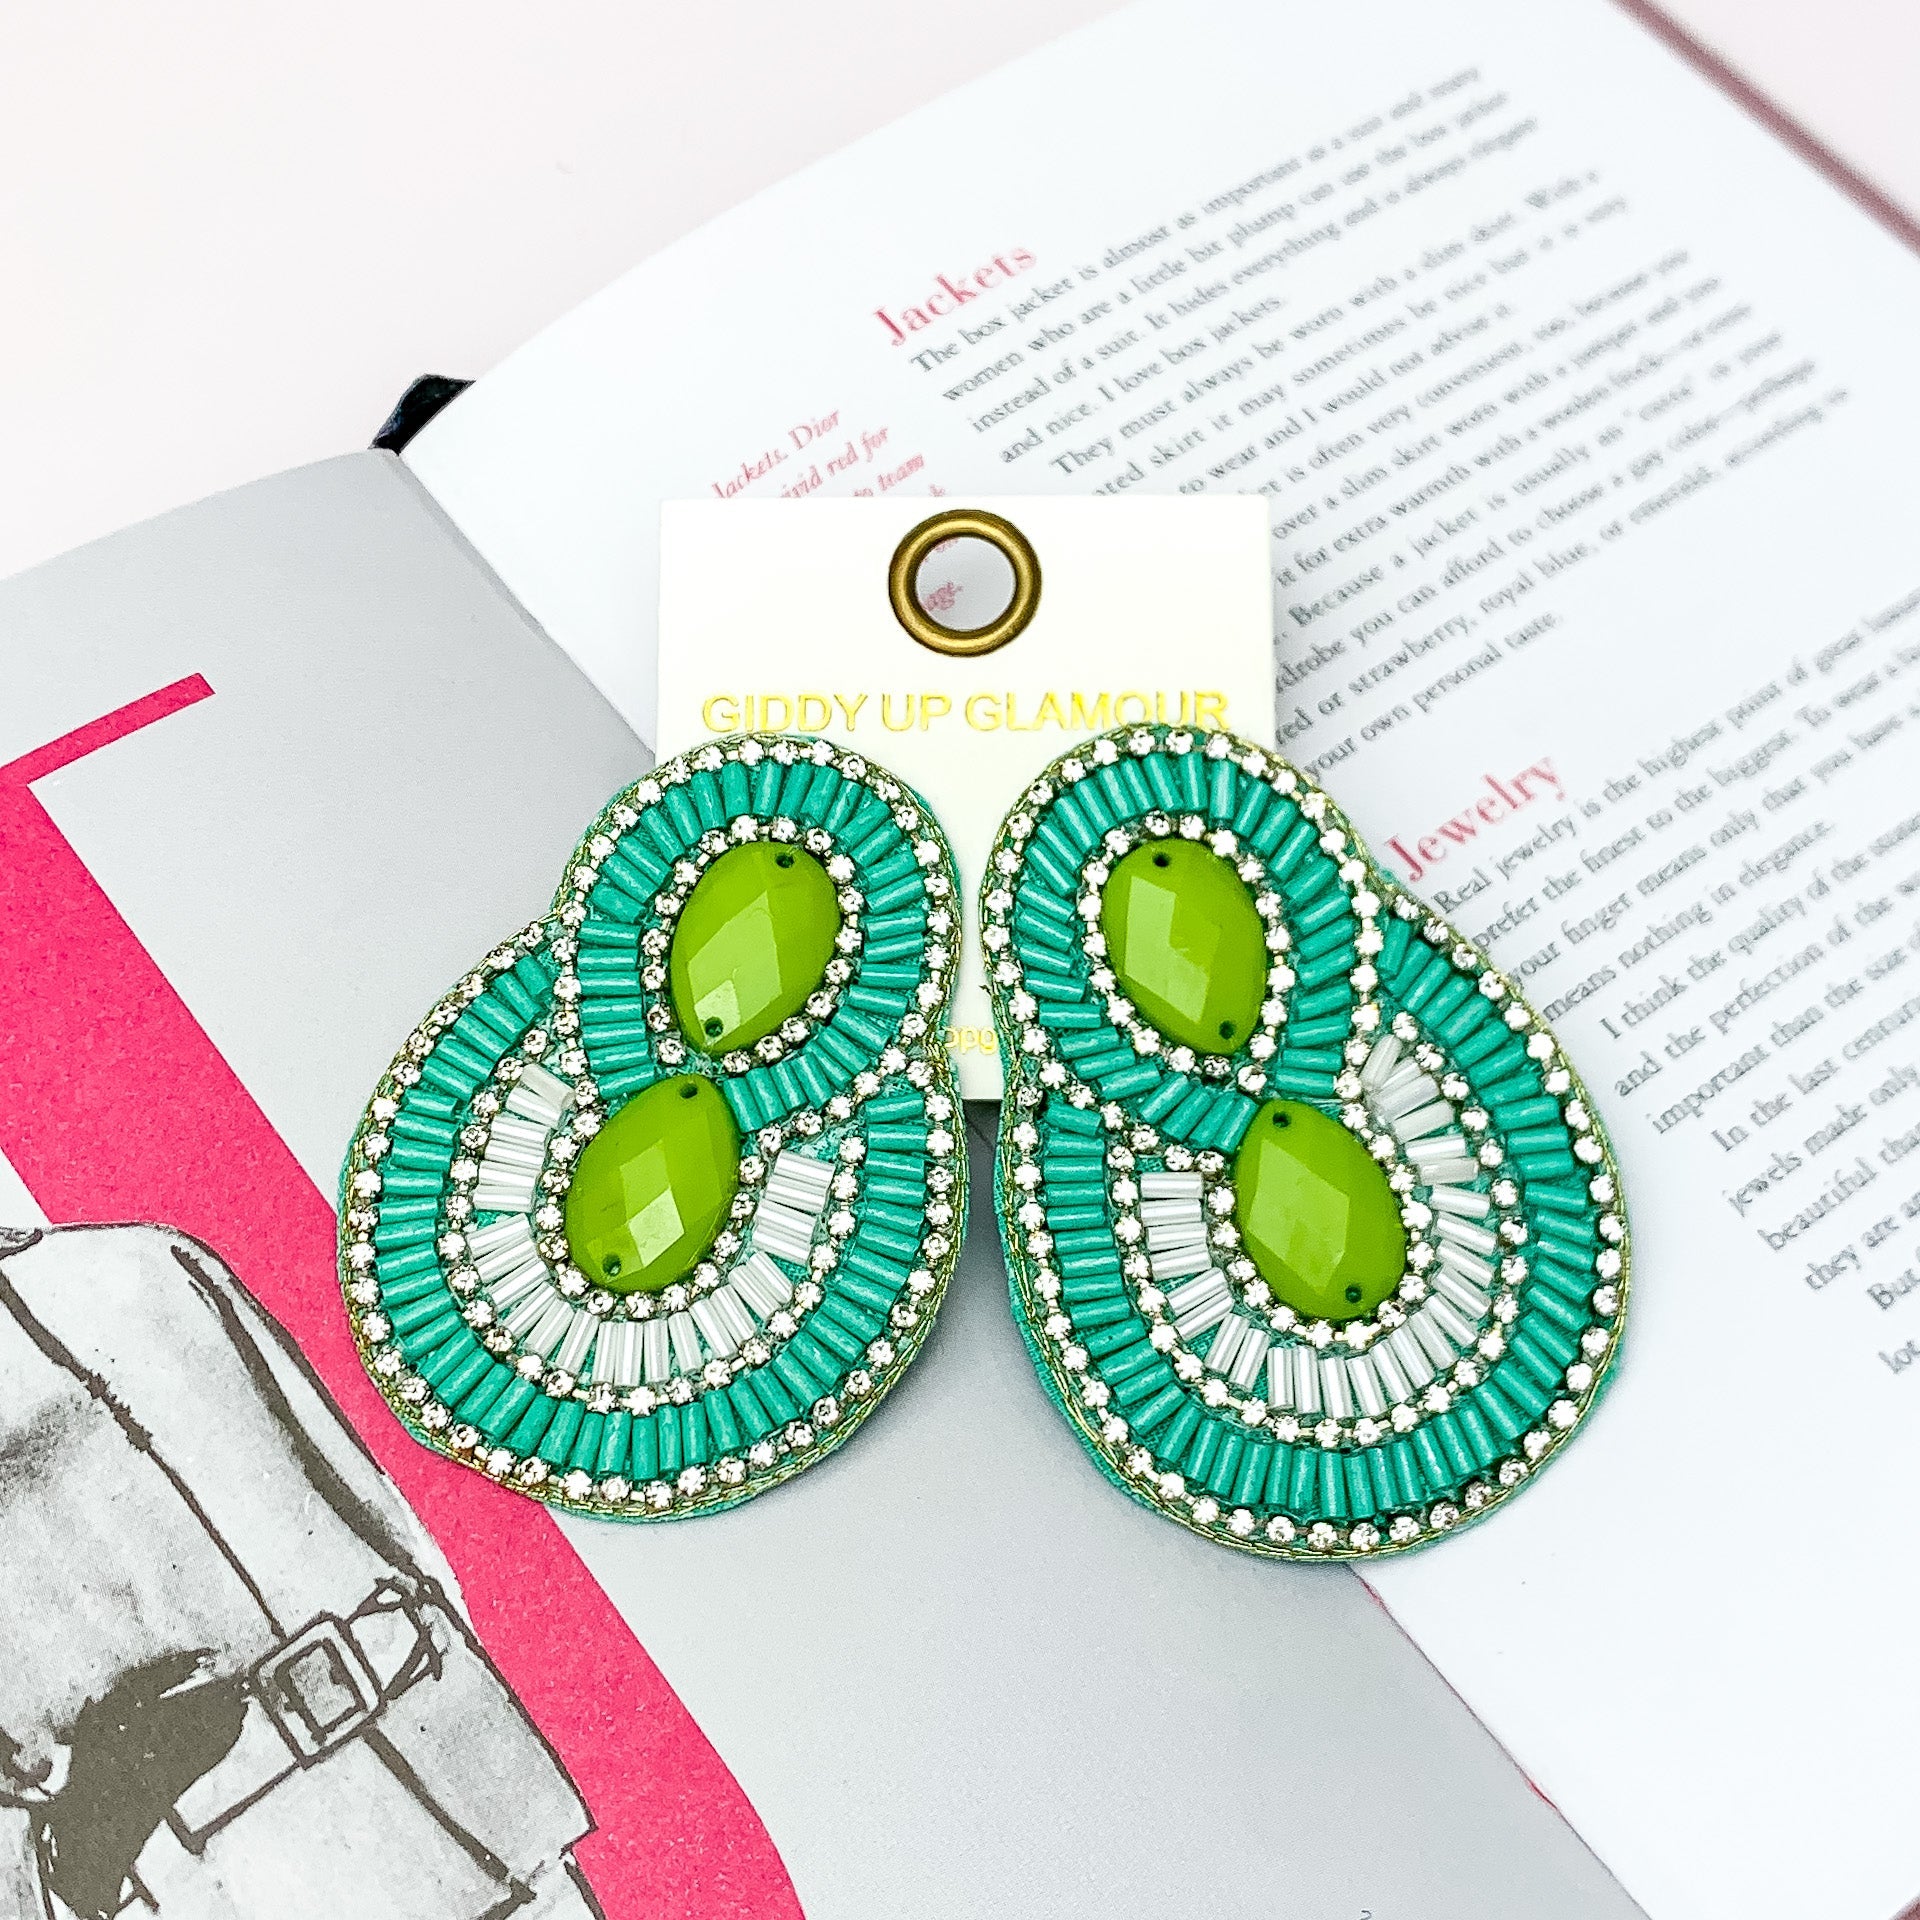 Dazzling Oval Earrings Outlined in Clear Crystals with Beads in Green. Pictured on a white background with a book behind the earrings. 